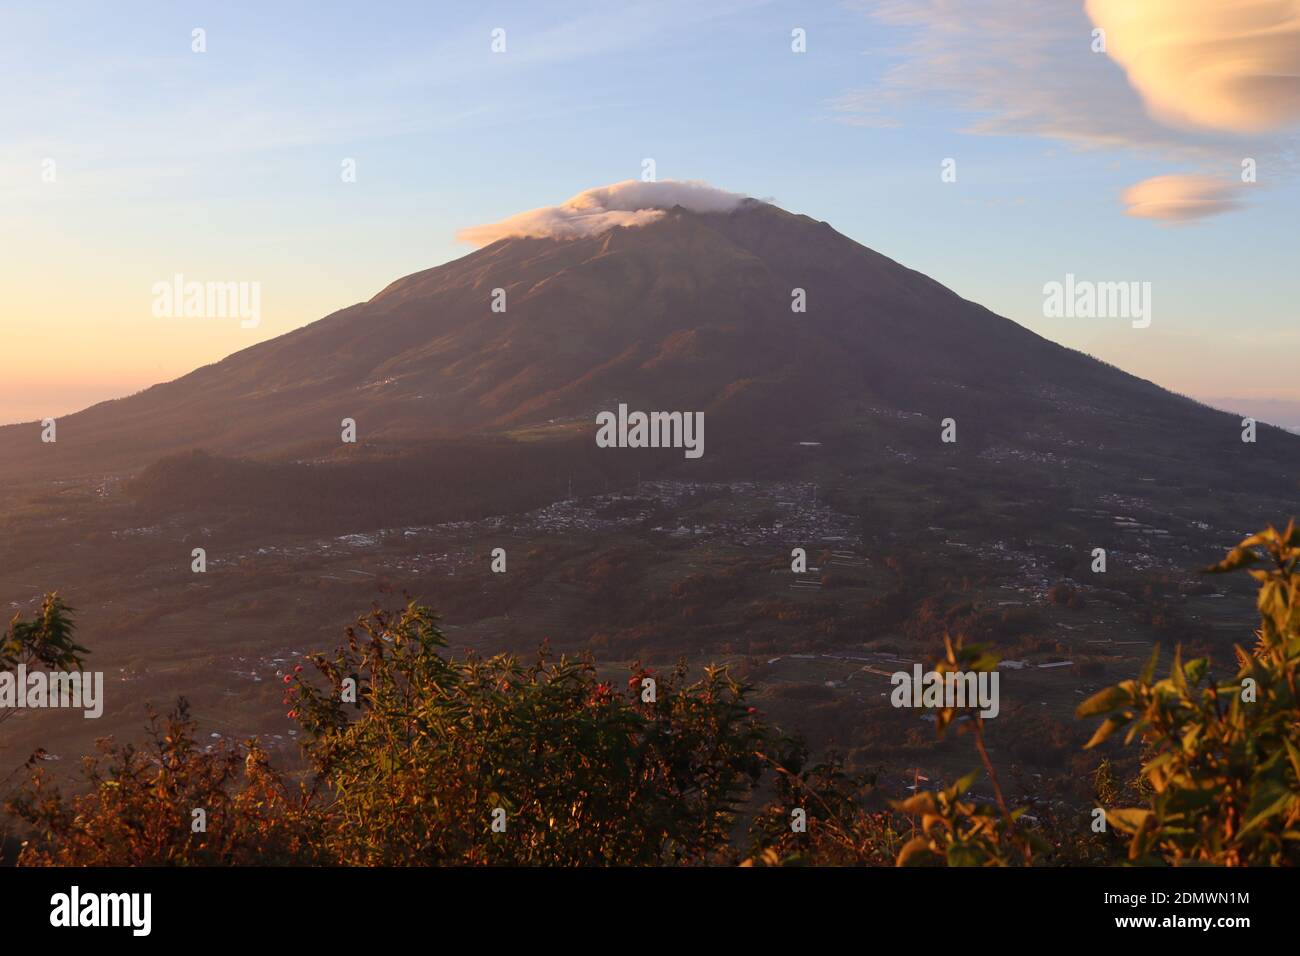 The landscape of Mount Merbabu, which is dashing, rises in the morning with the sweet sunshine that envelops its prowess Stock Photo